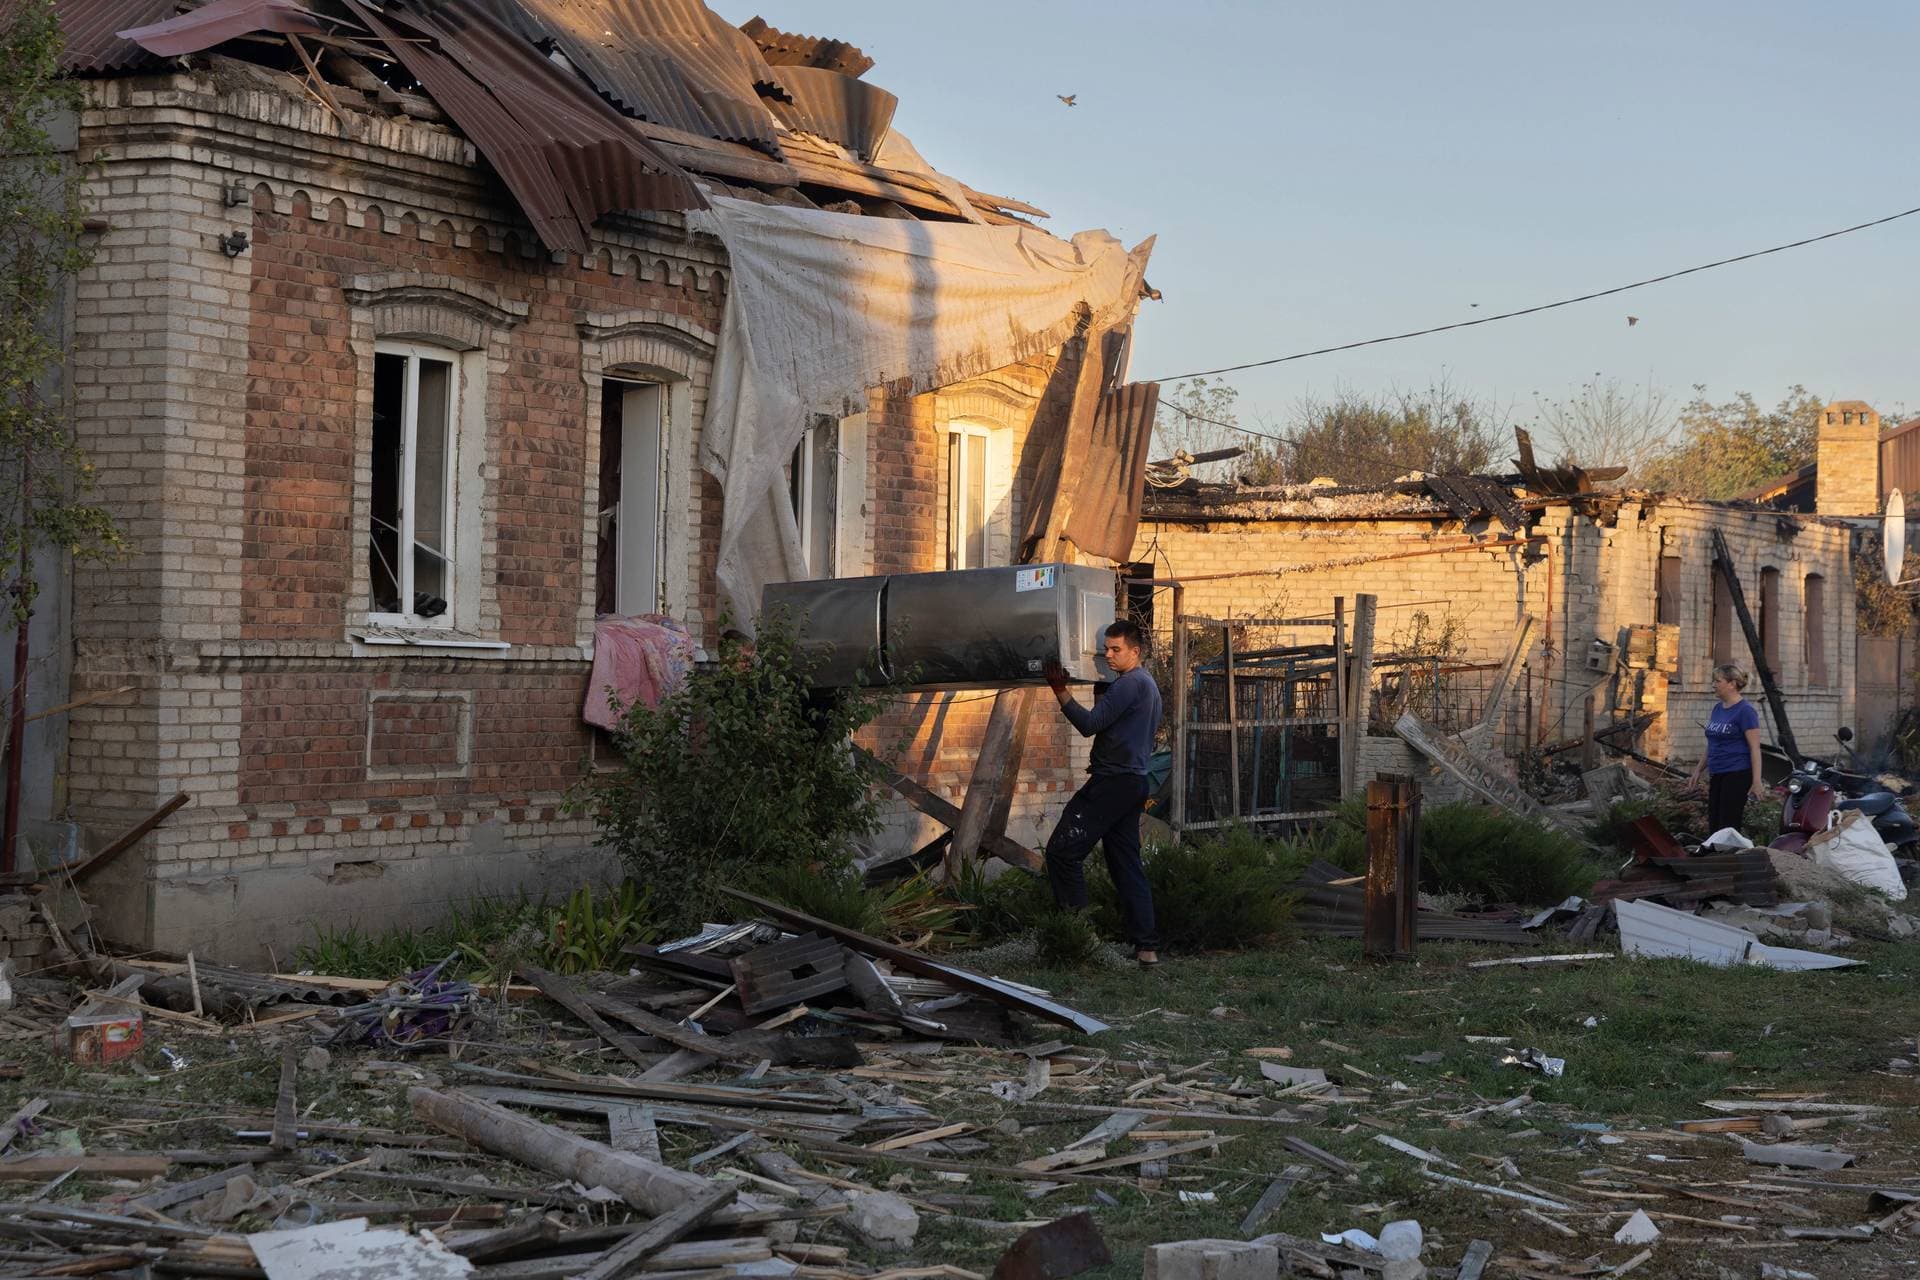 Local residents move a refrigerator from a house that was damaged by a Russian rocket attack in Kostiantynivka